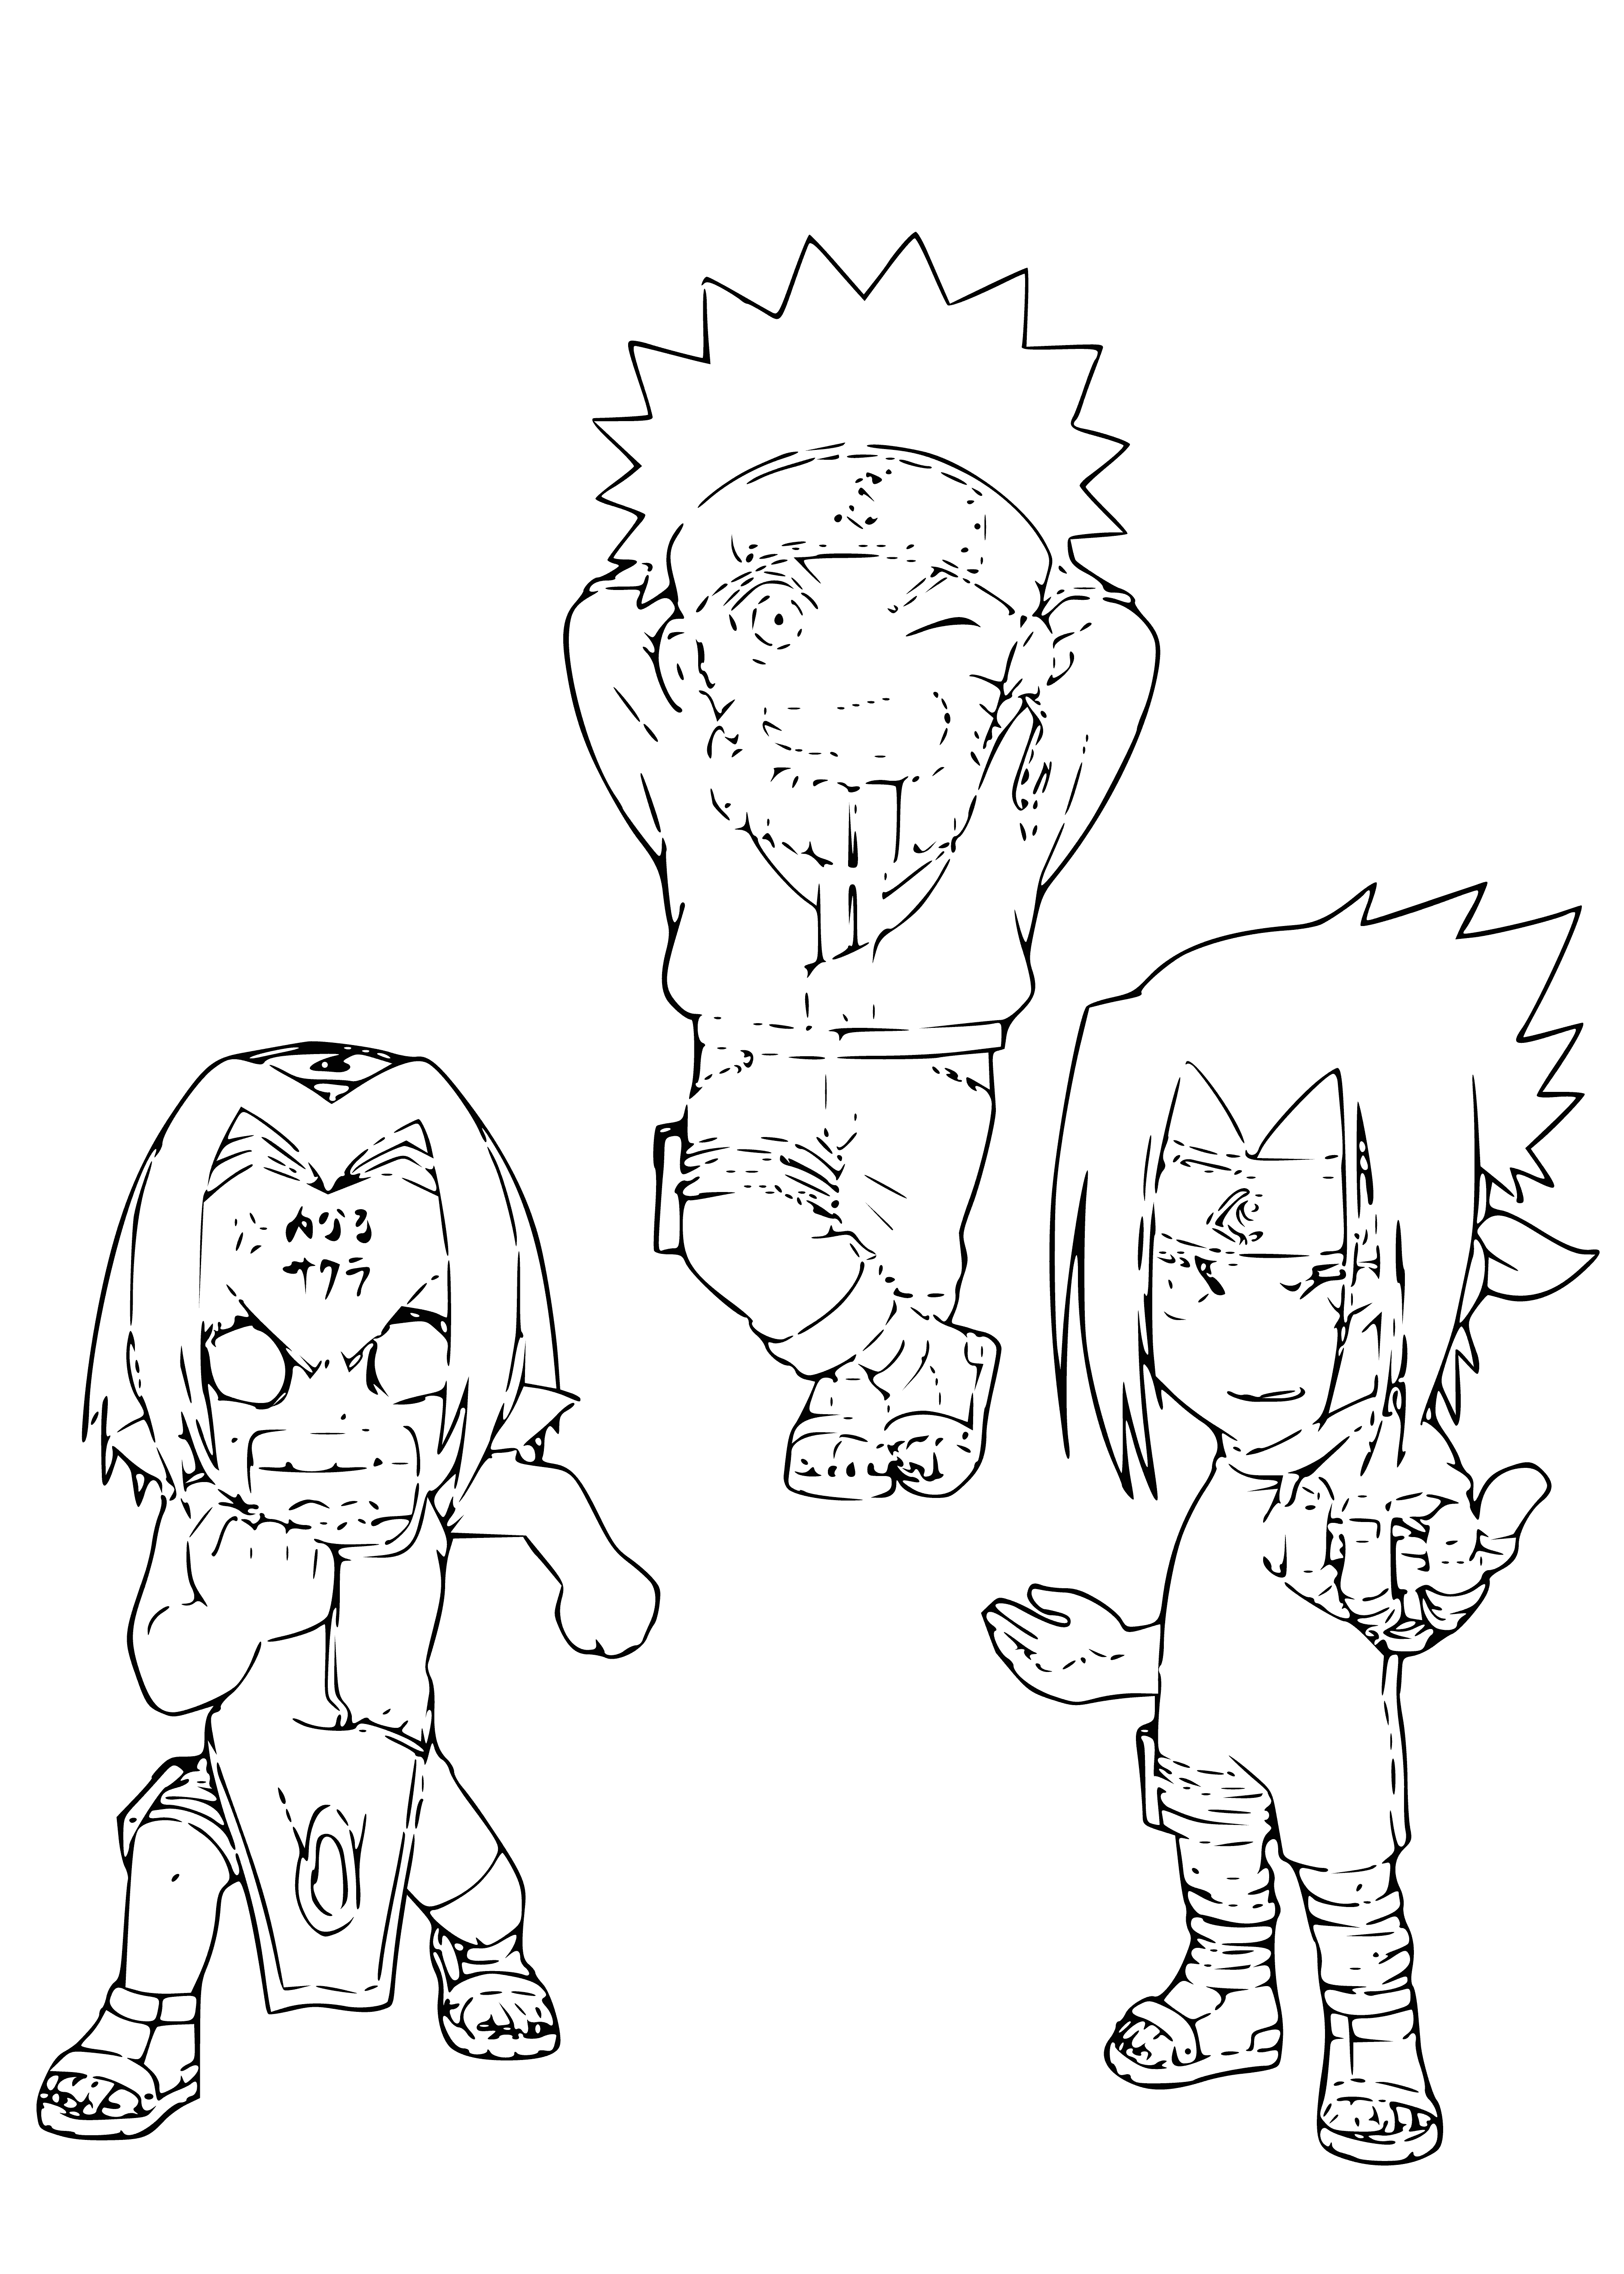 coloring page: Three determined friends united: Naruto (blue/gold), Sakura (pink), and Sasuke (dark) stand with fists raised.